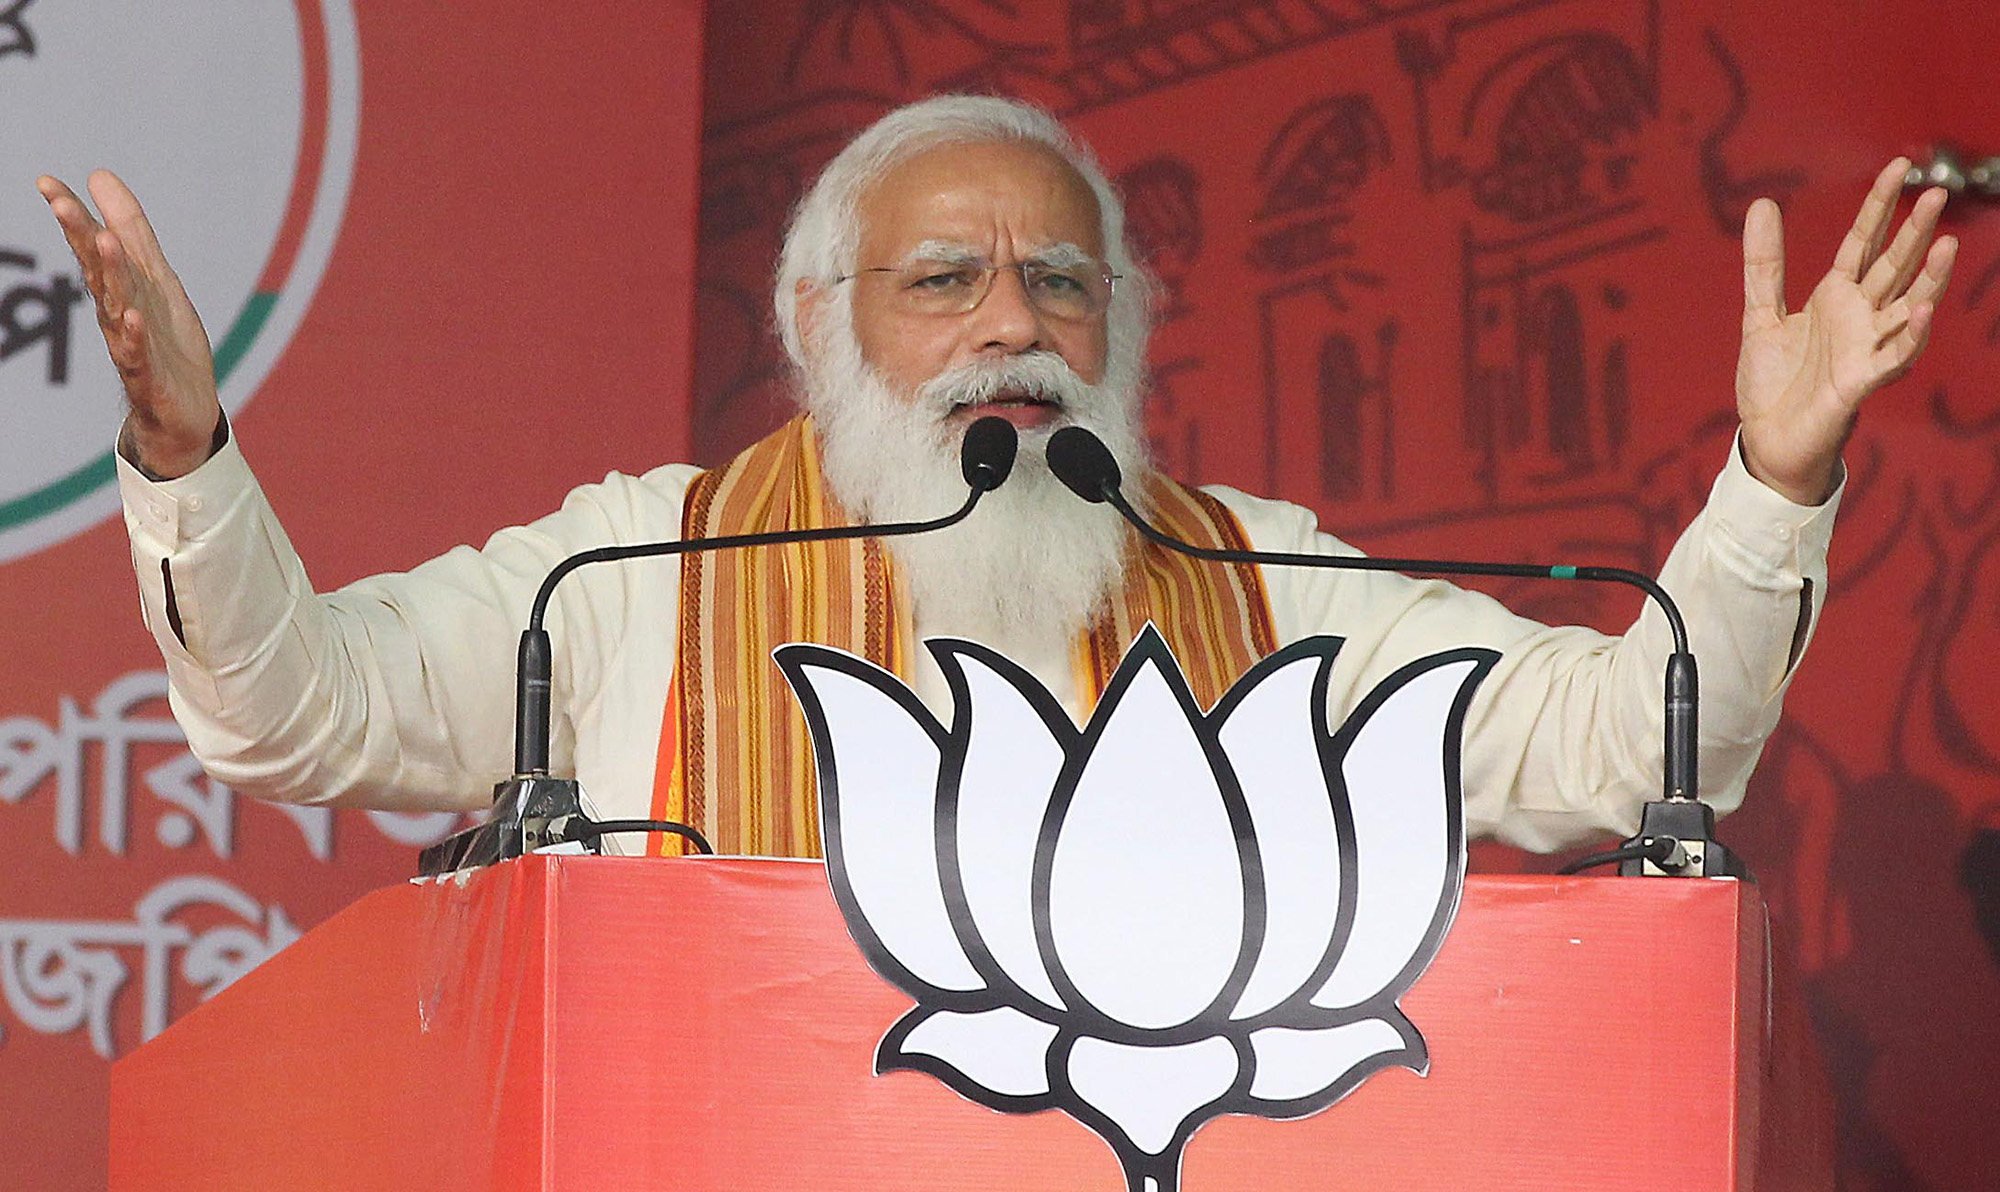 Indian Prime Minister Narendra Modi speaks to supporters during a campaign rally. Photo: TNS